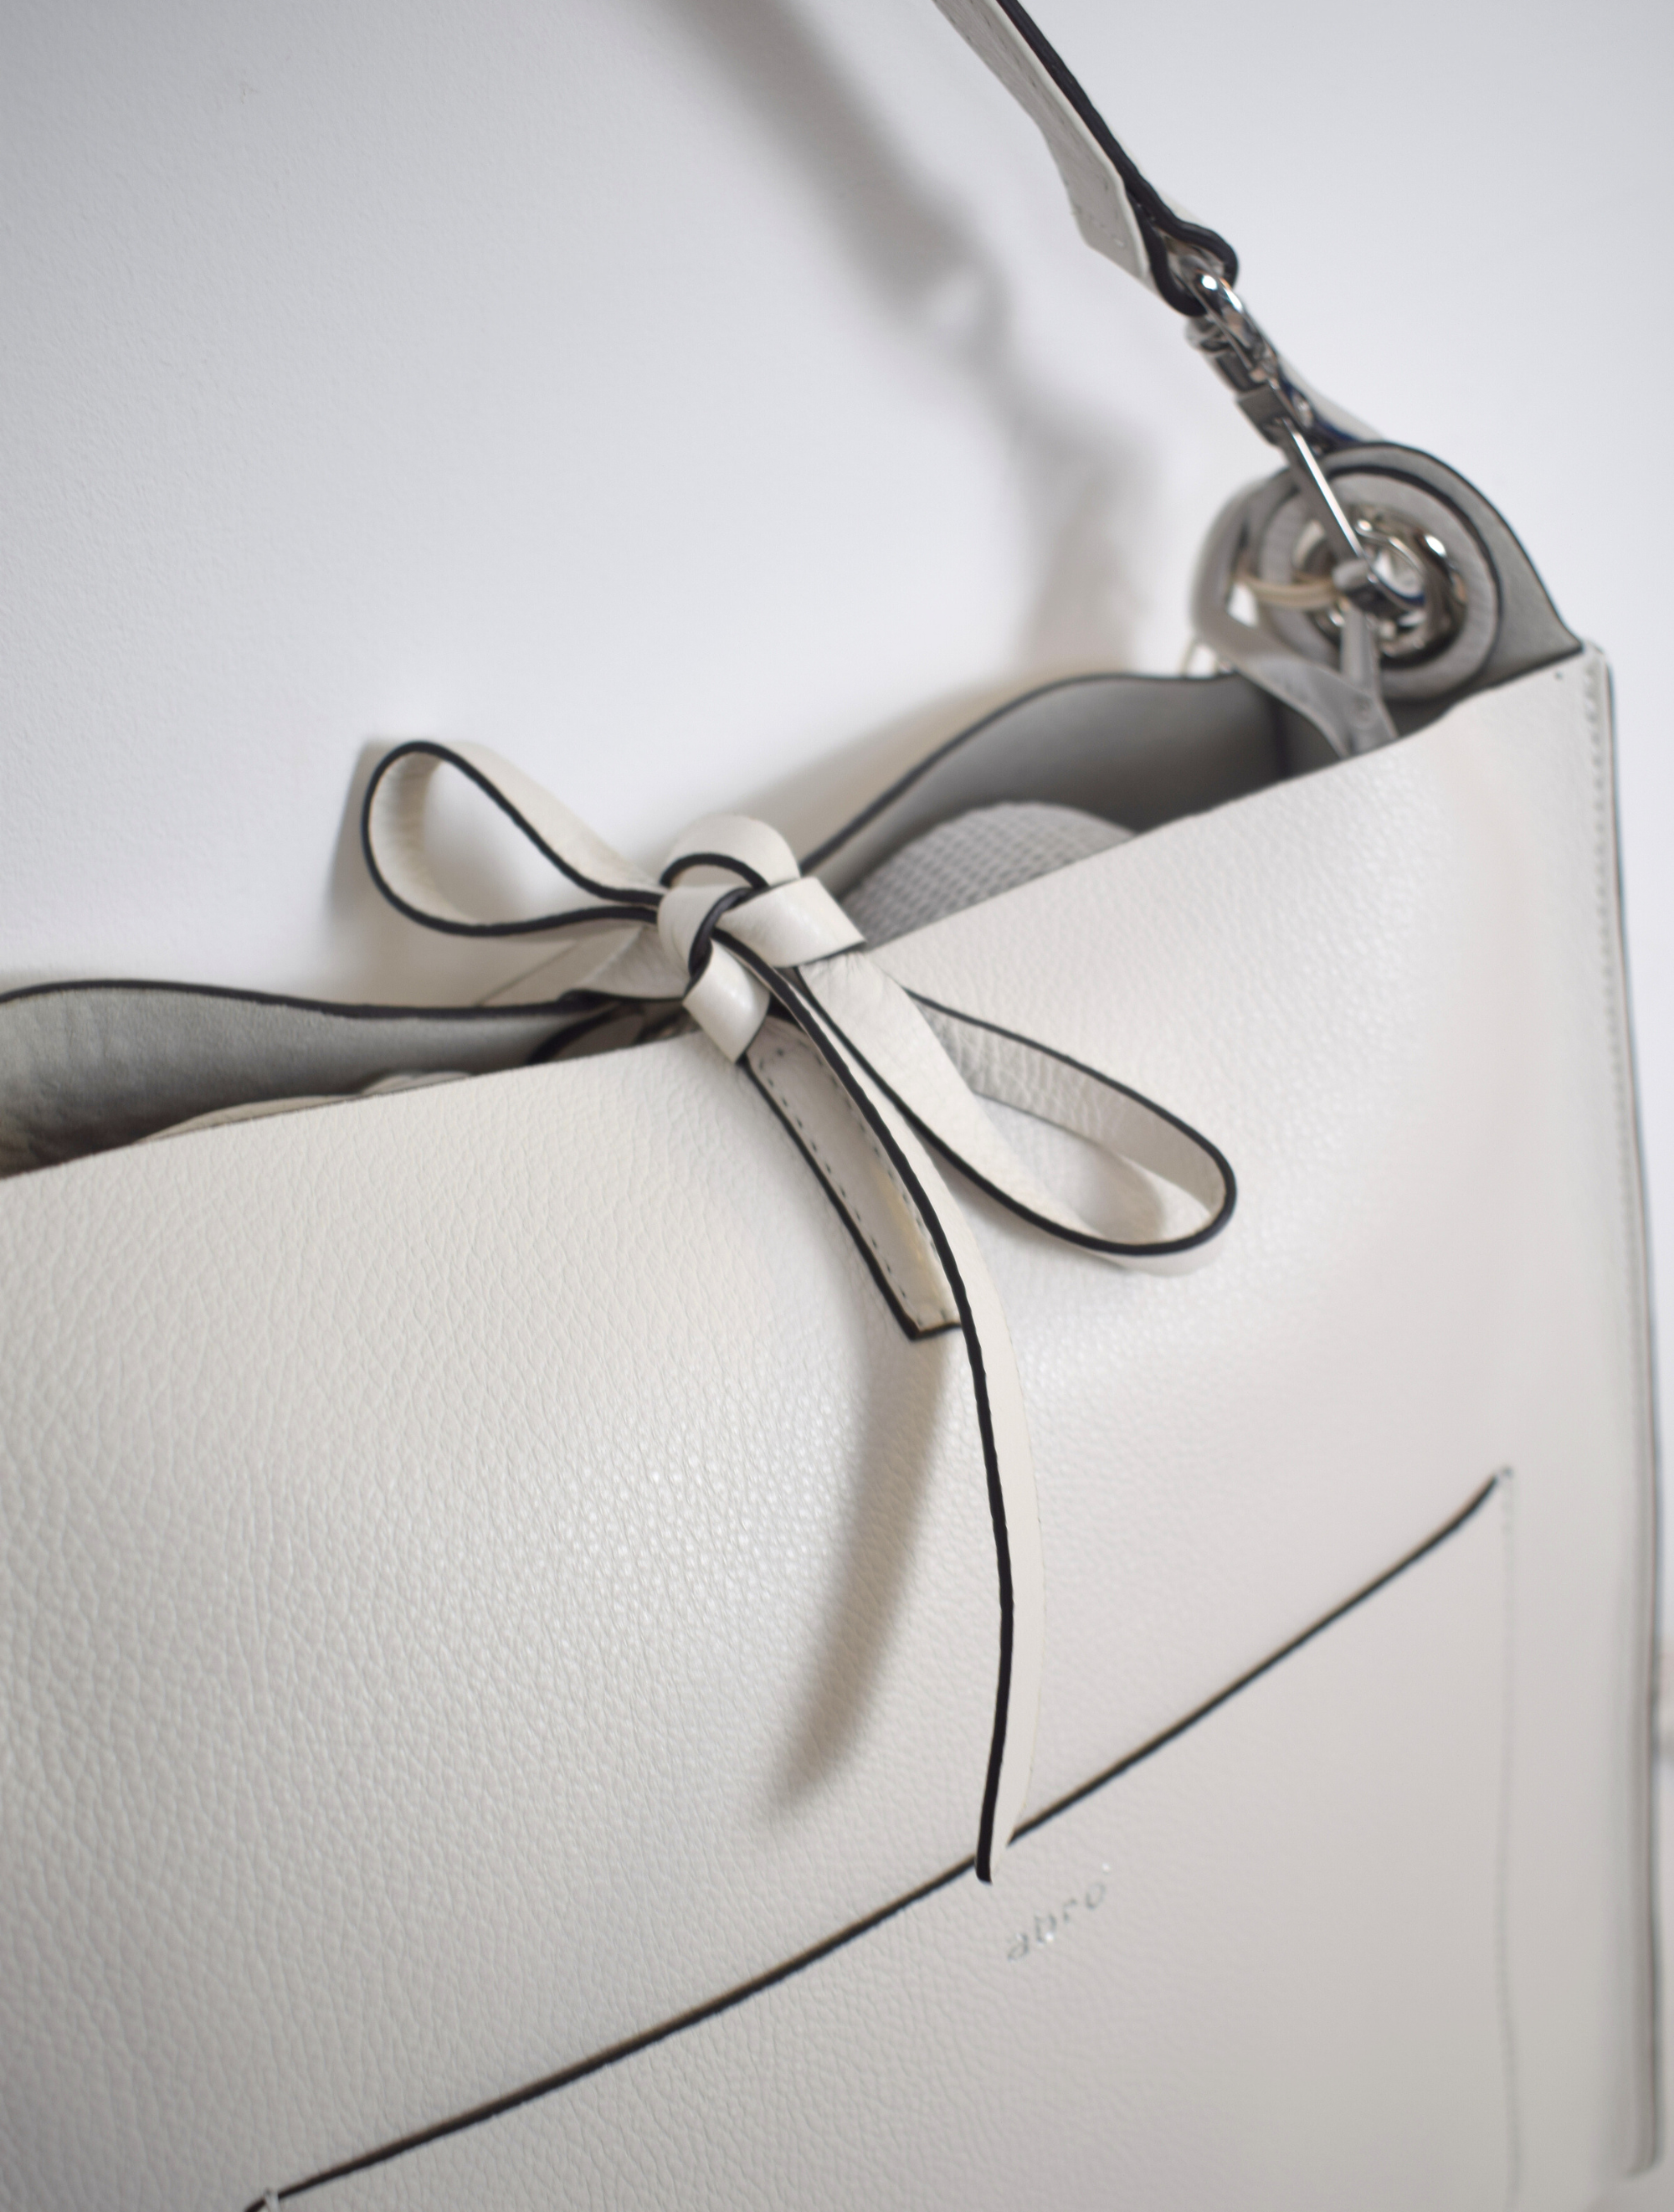 ivory leather bag with silver hardware.  A cross body strap and a handle. 